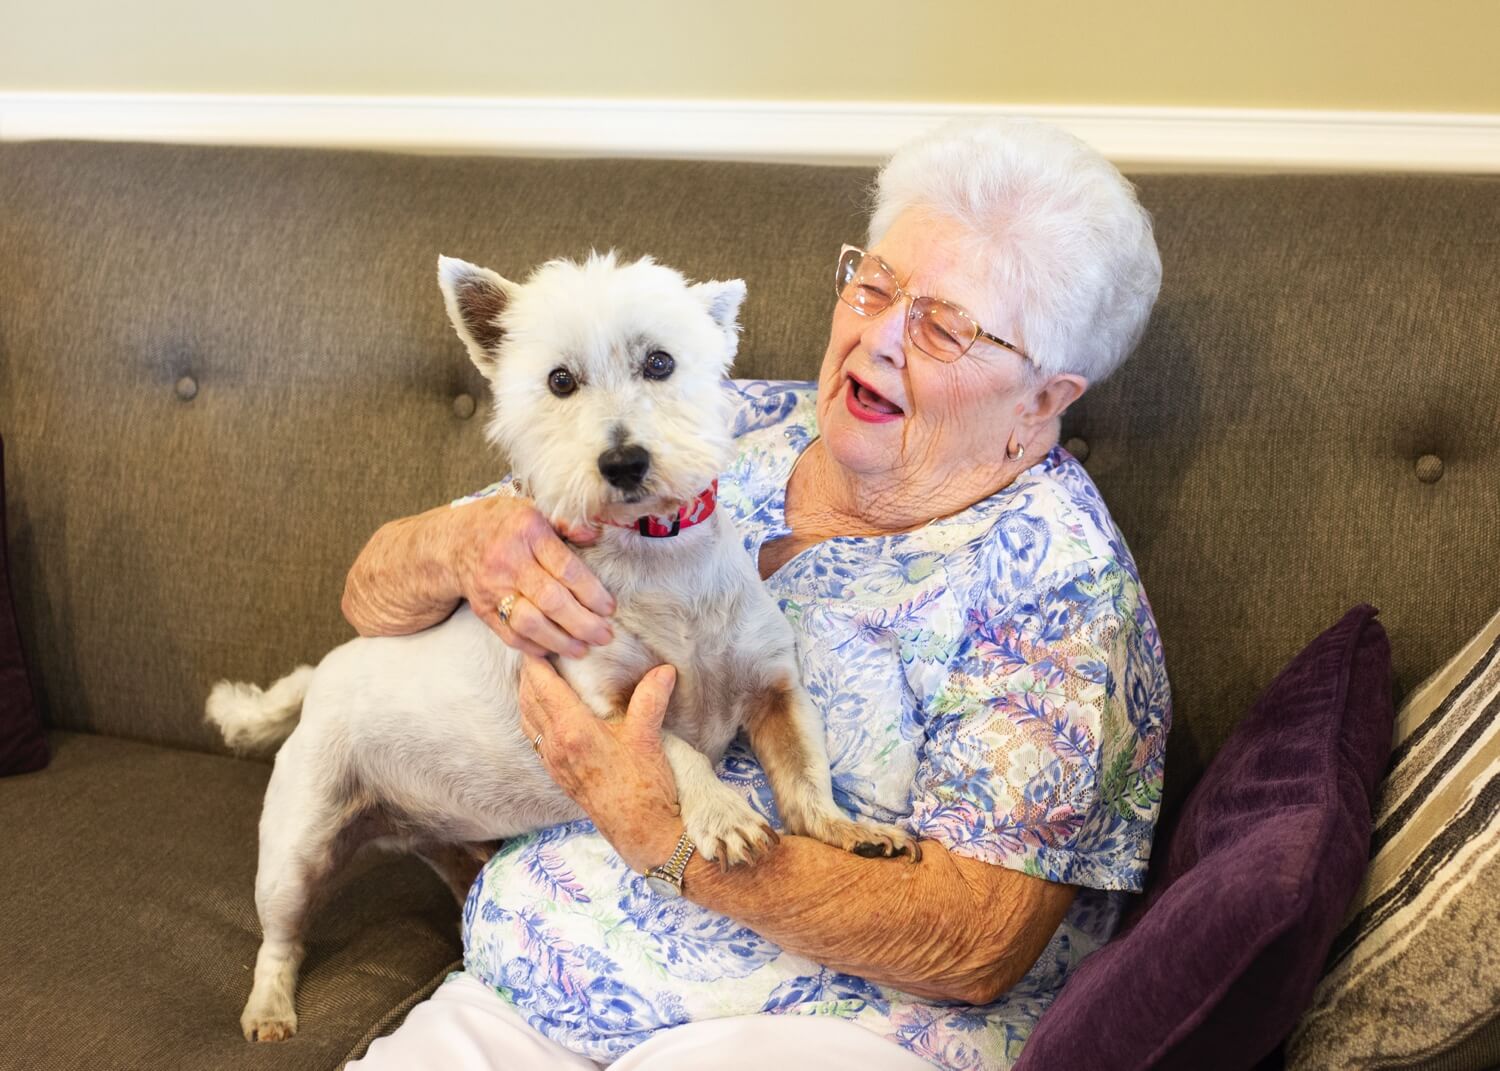 Senior woman sitting on a couch with a white dog on her lap